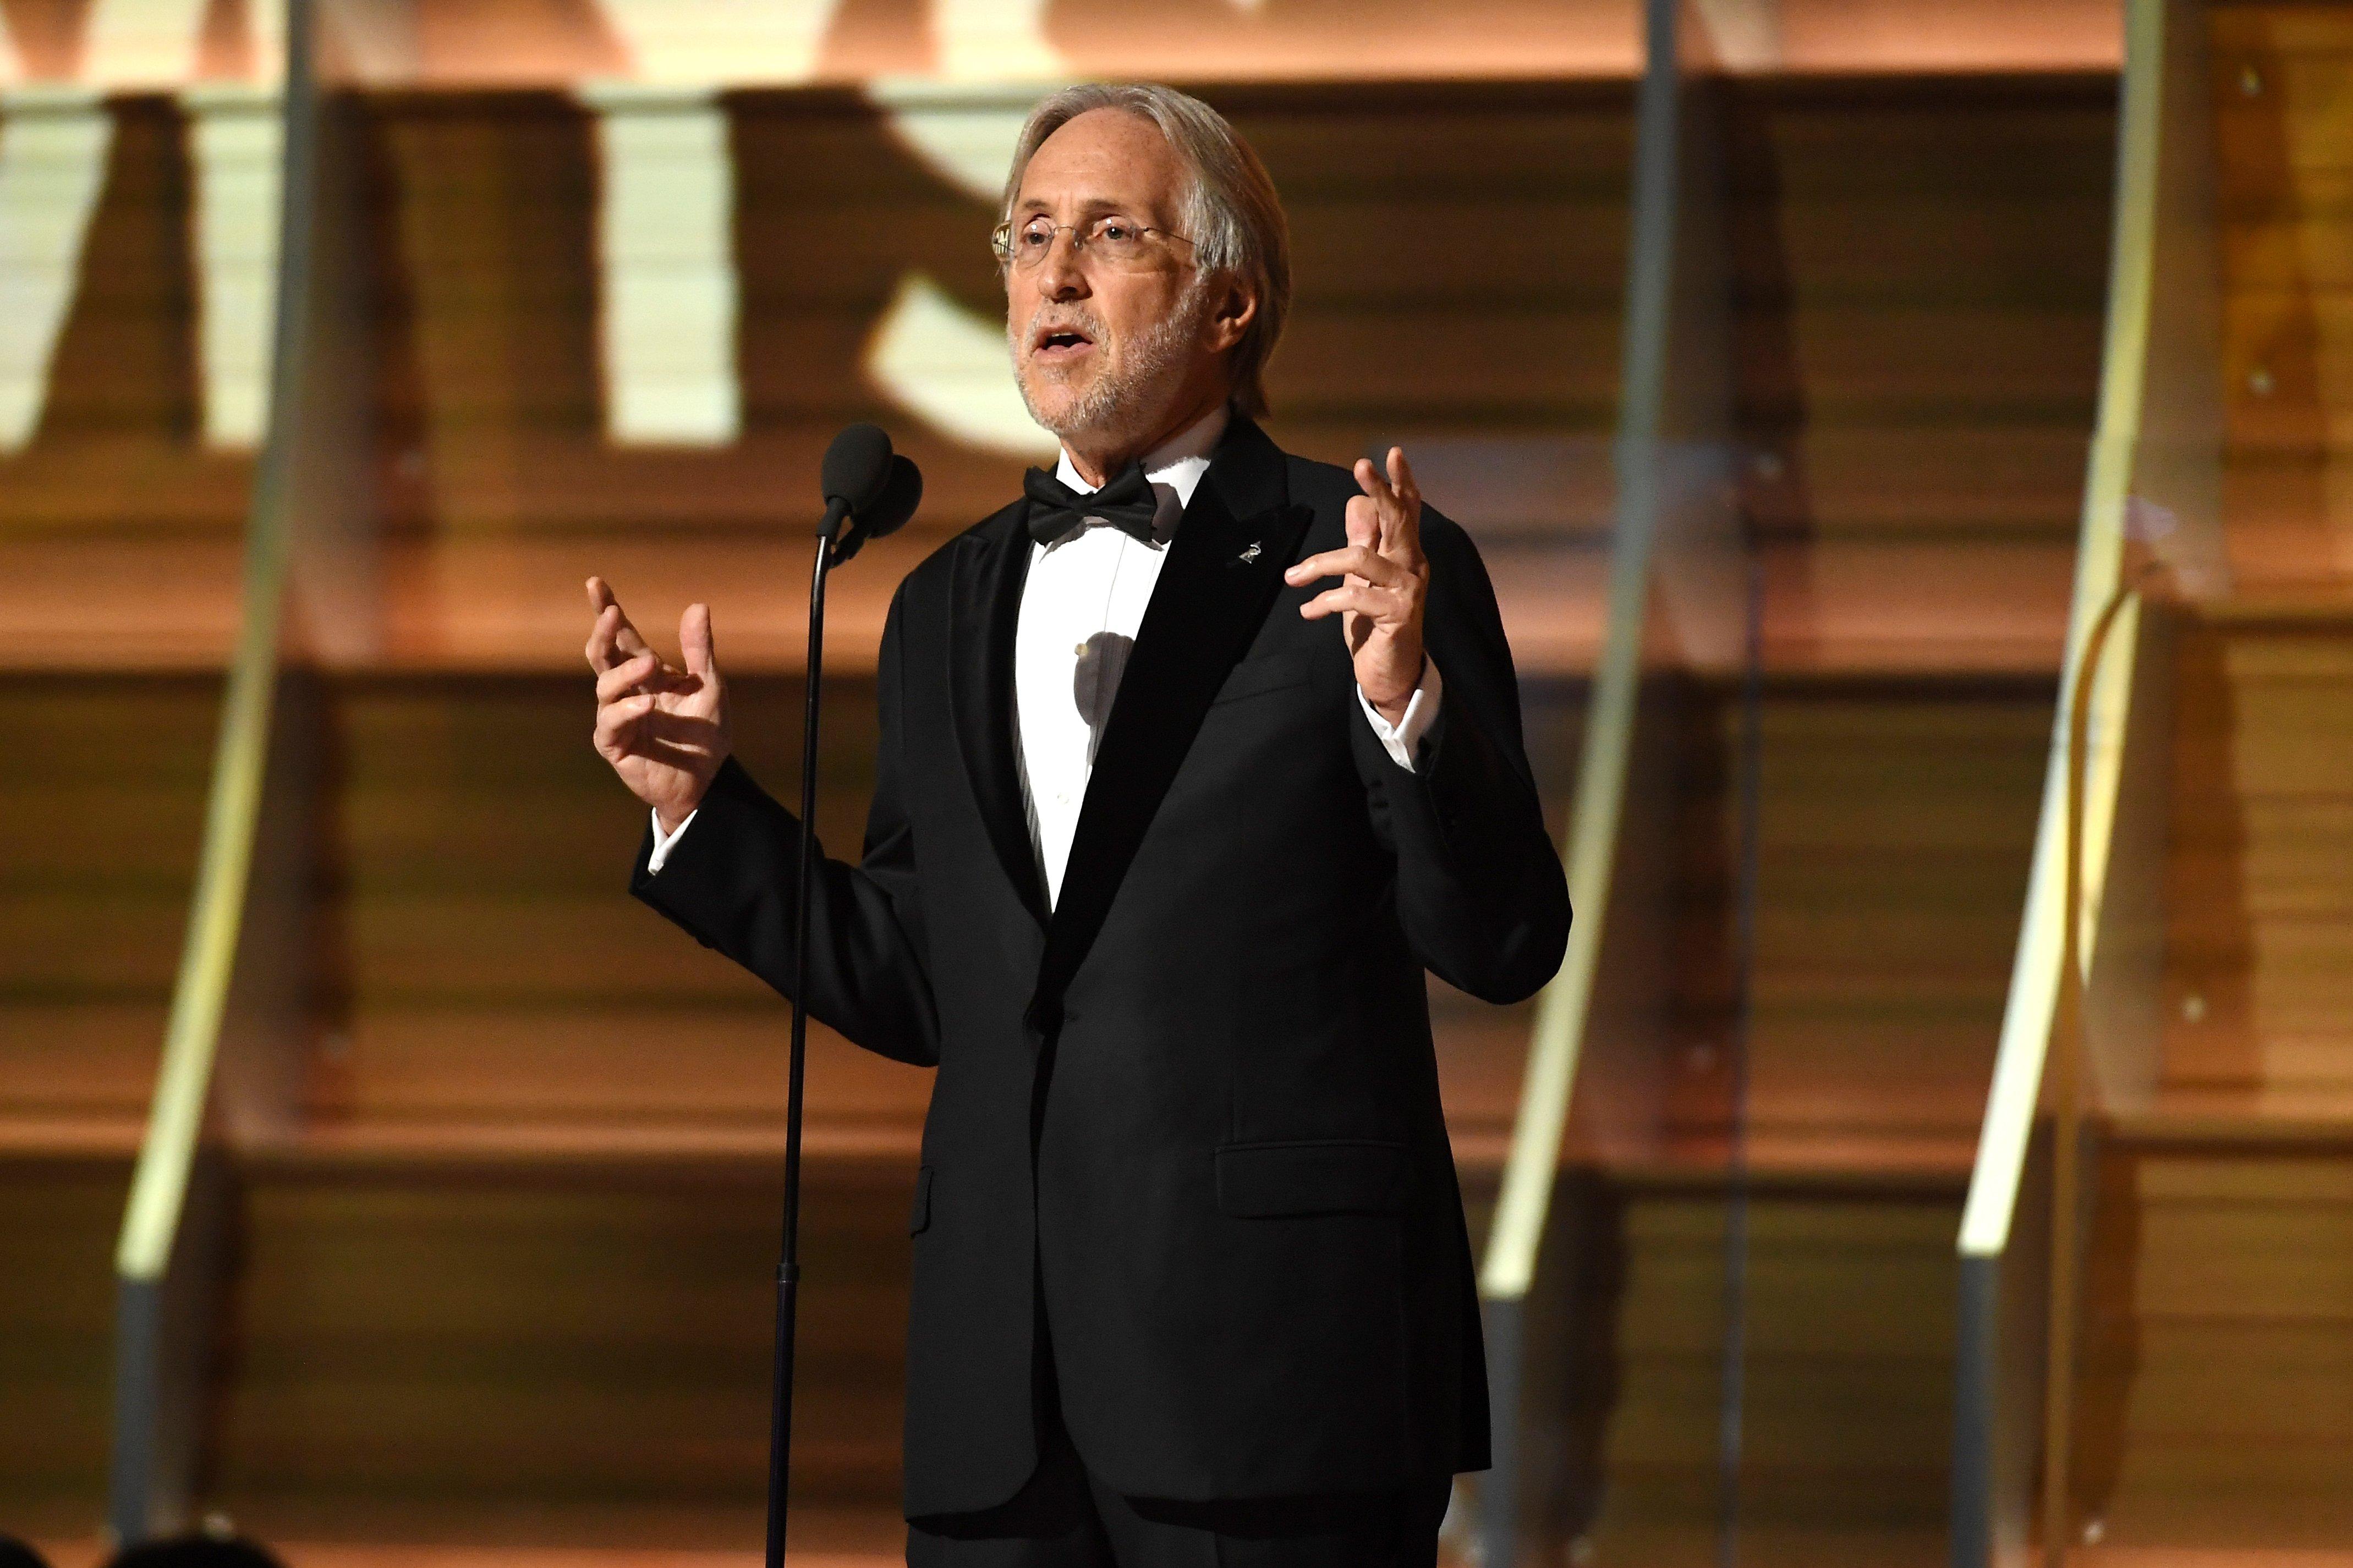 Neil Portnow at the 59th GRAMMY Awards in 2017